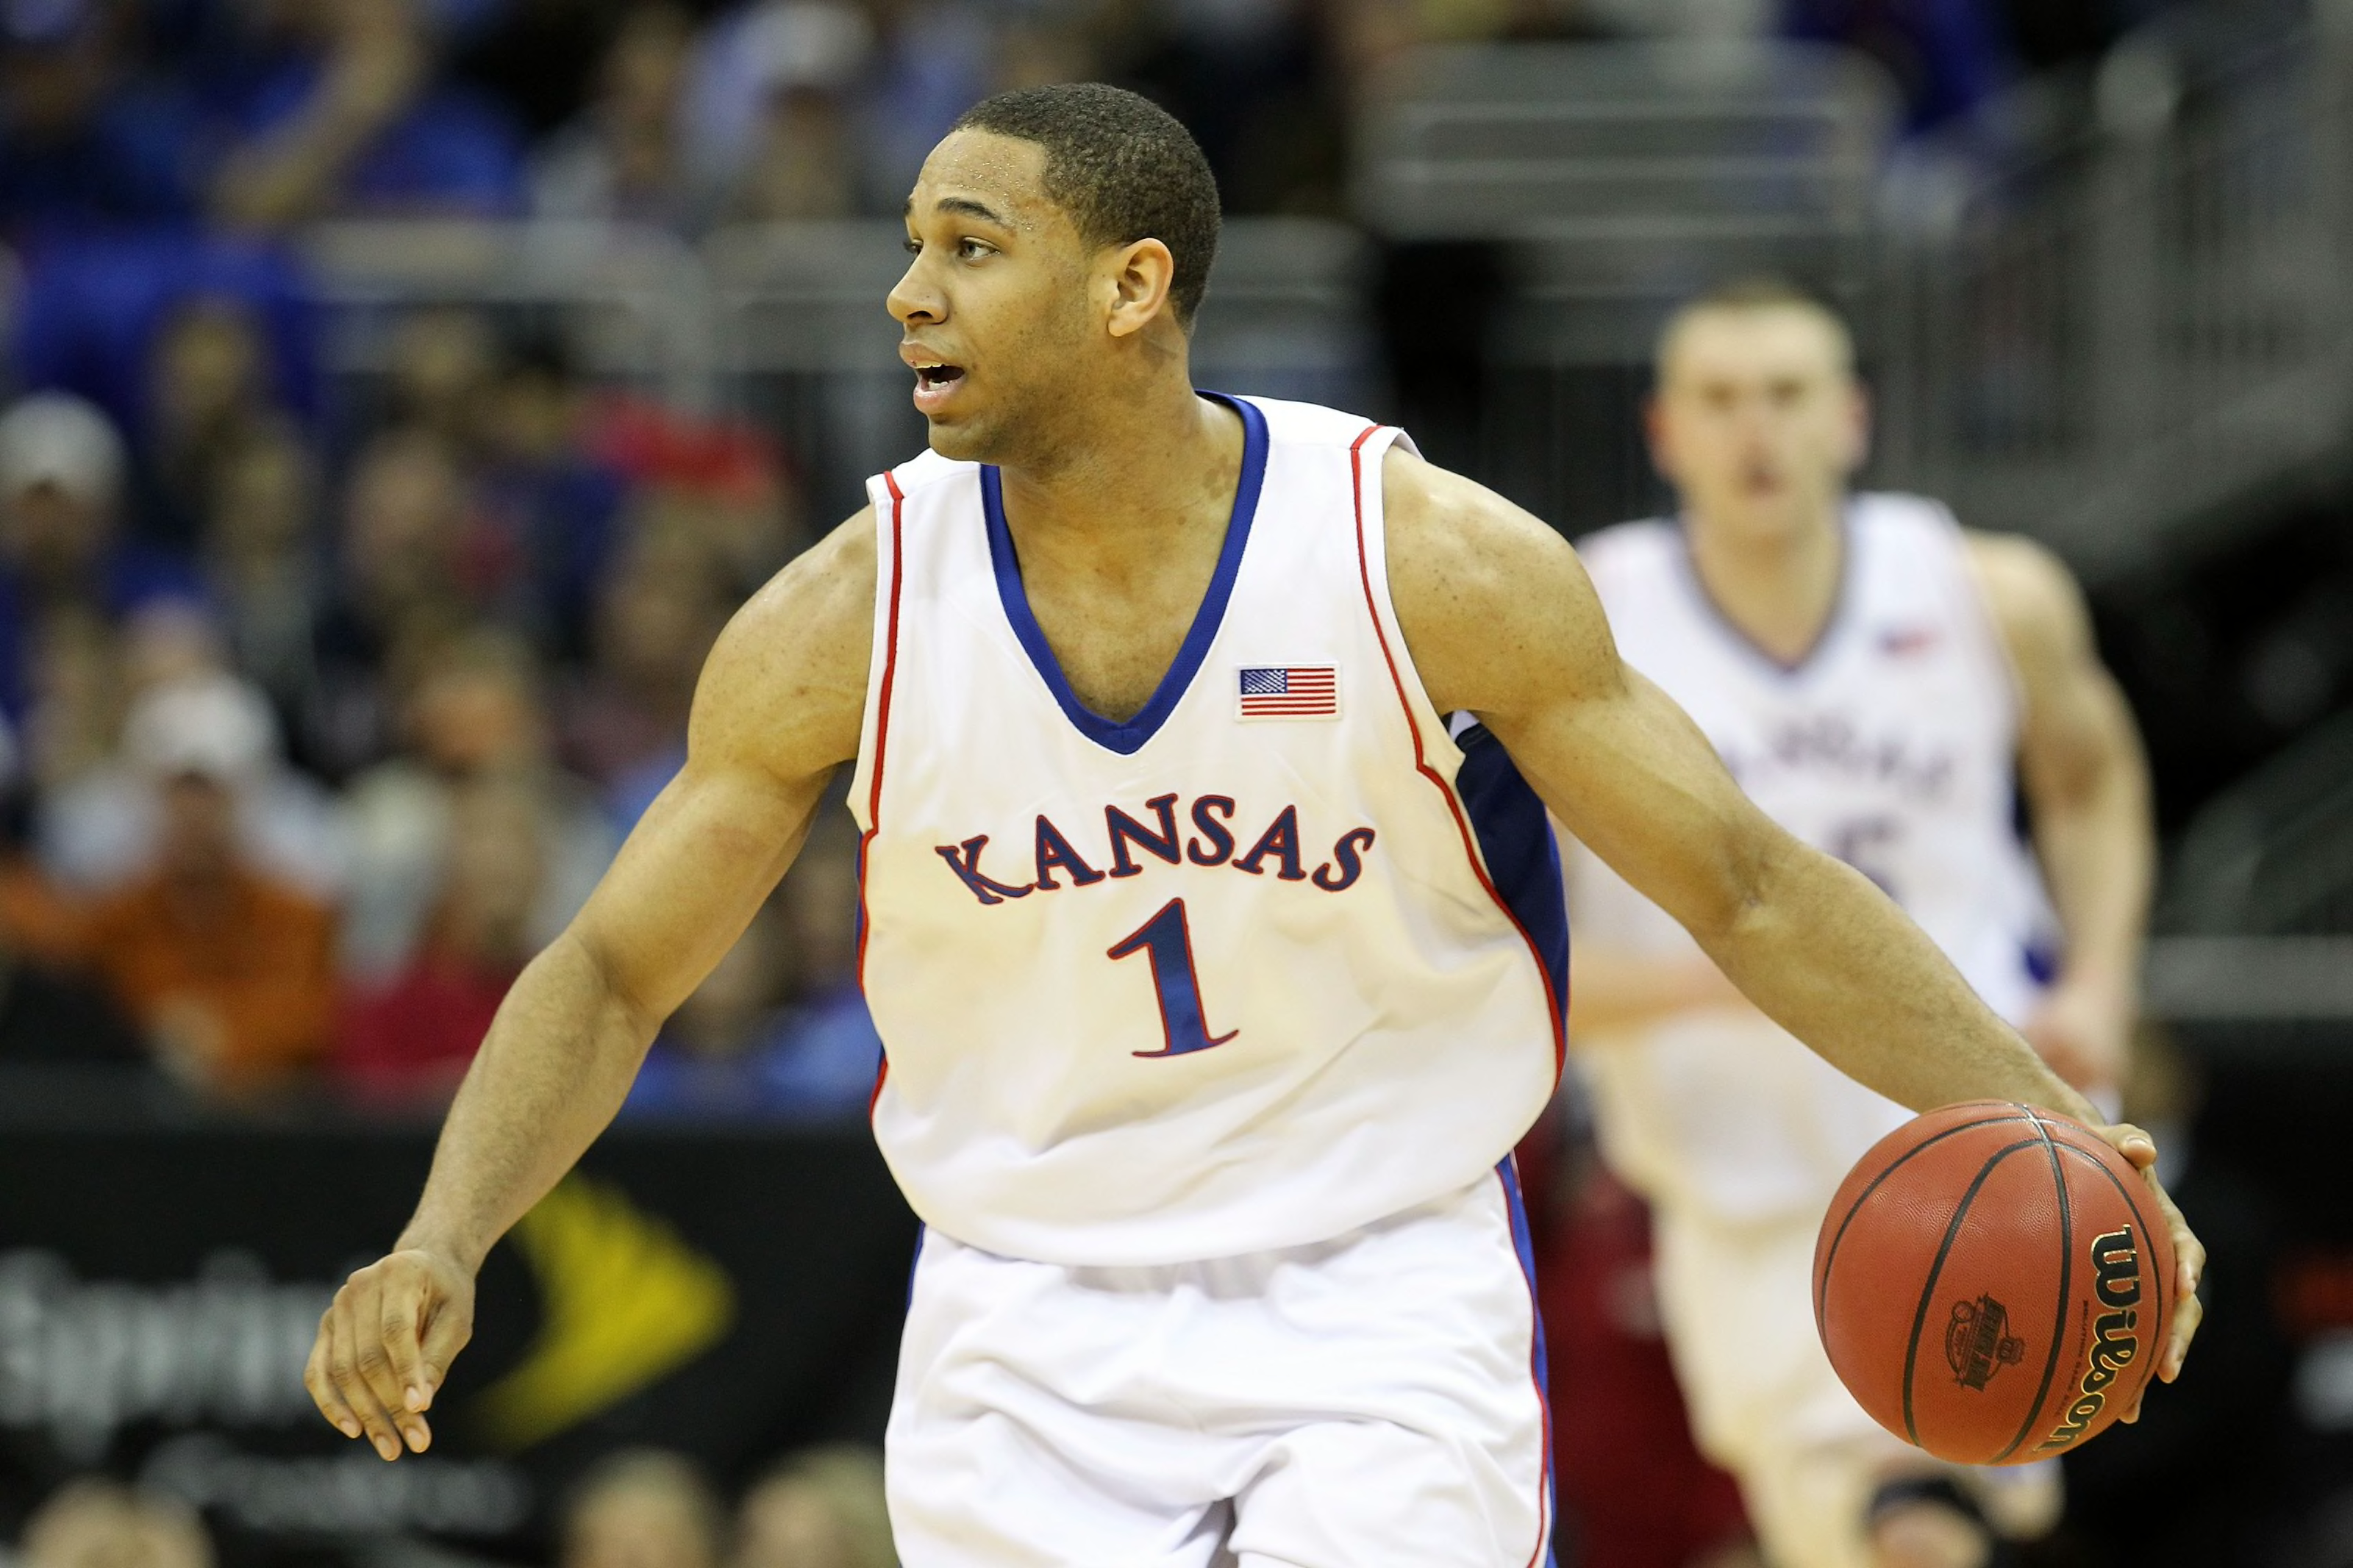 Kansas Basketball: Most disappointing one and done players - Page 5